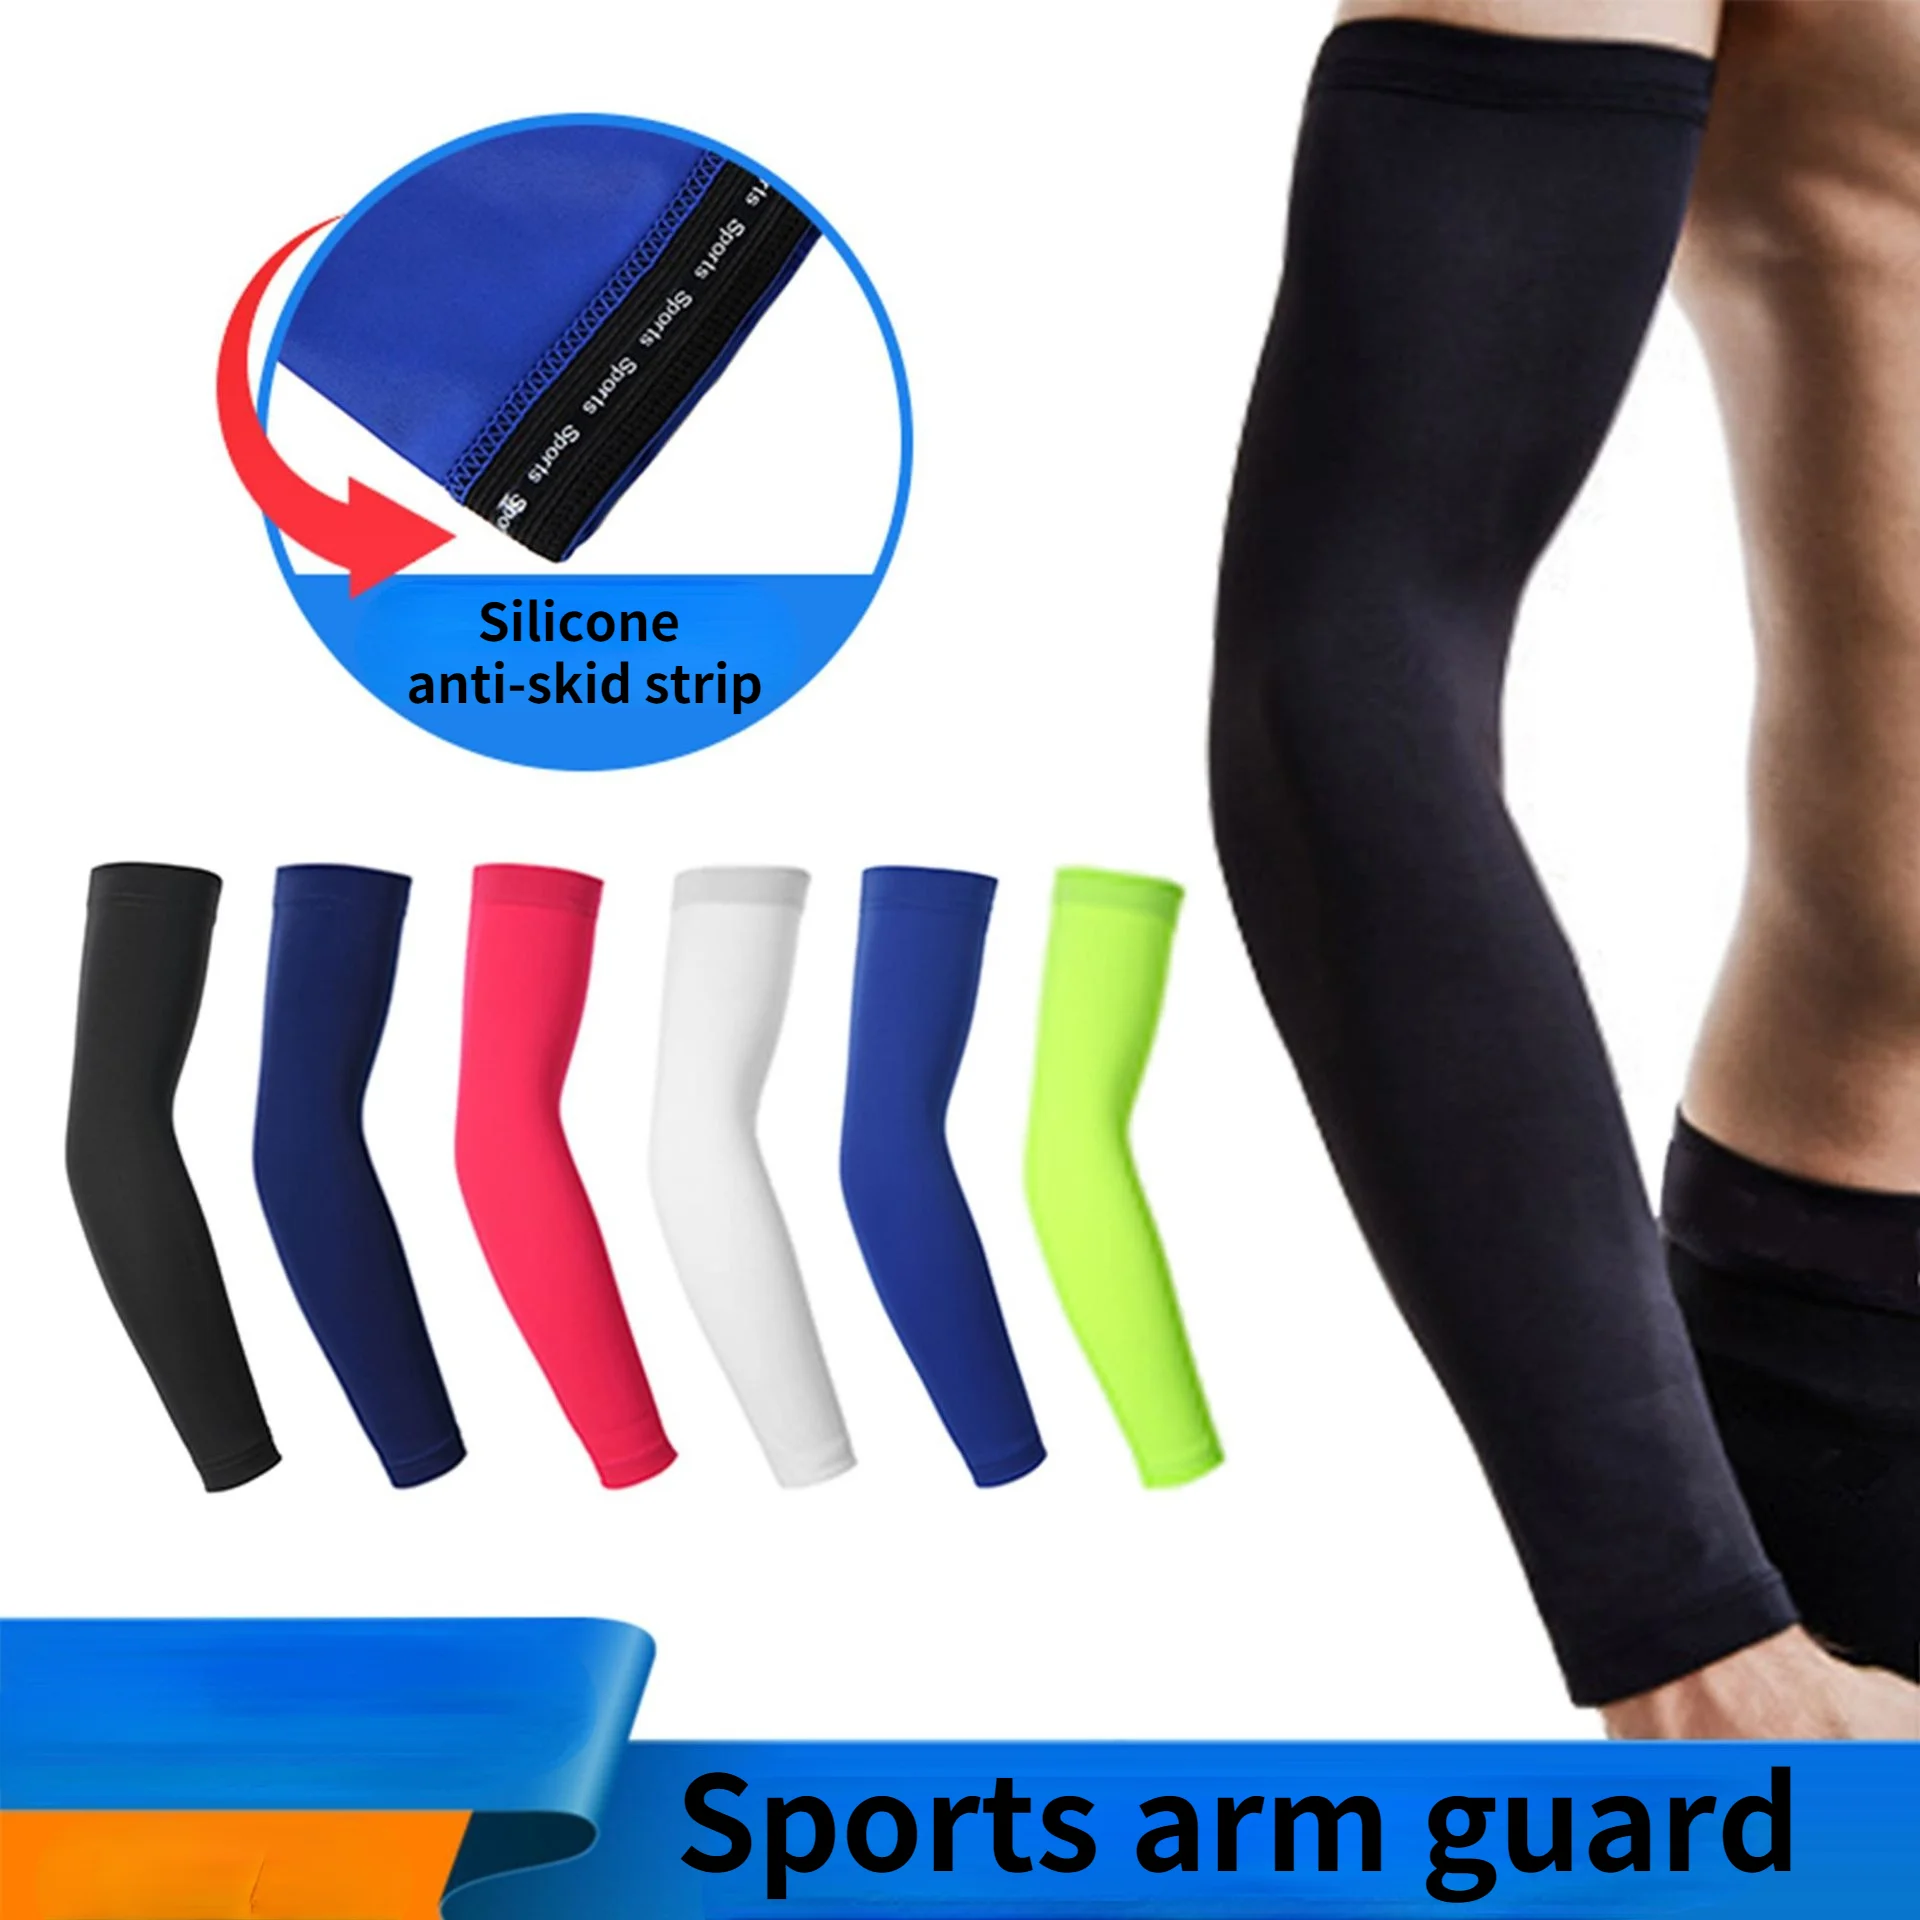 Unisex Arm Sleeves Cover UV Sun Protection Outdoor Sports Riding Arm Warmer 